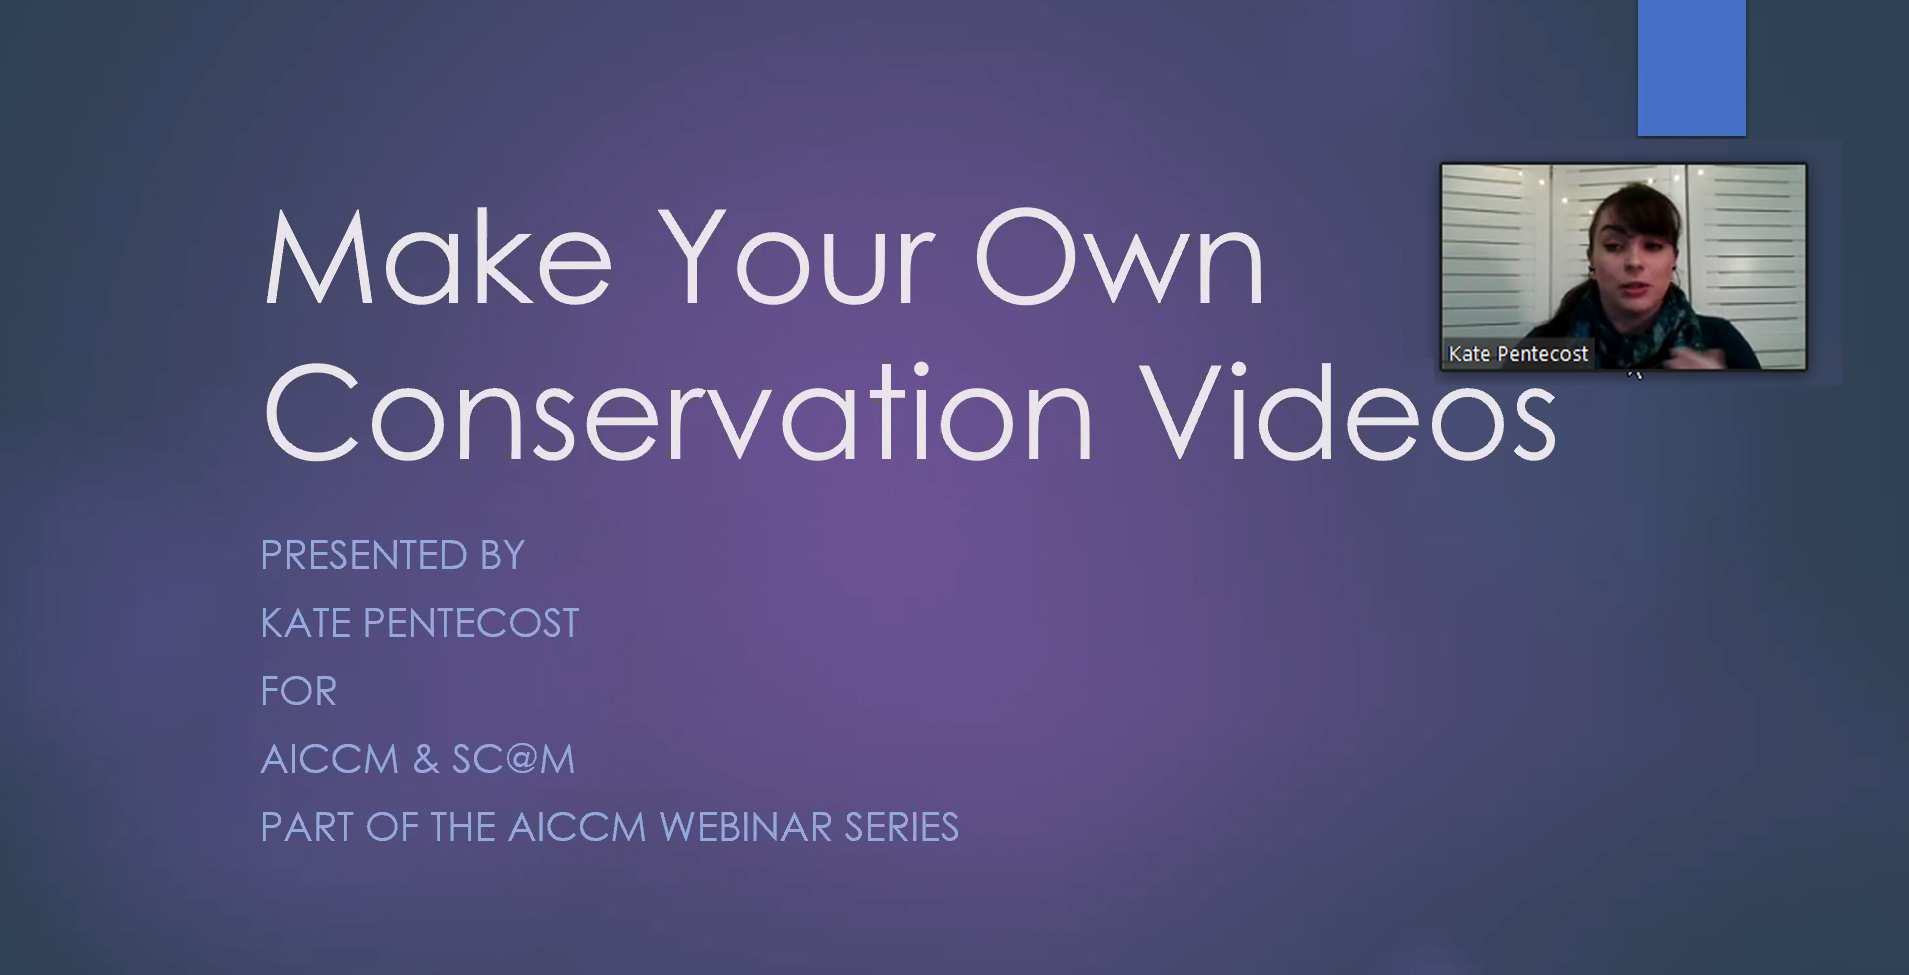 Screen shot of Make Your Own Conservation Videos webinar. Kate Pentecost's image on top right corner